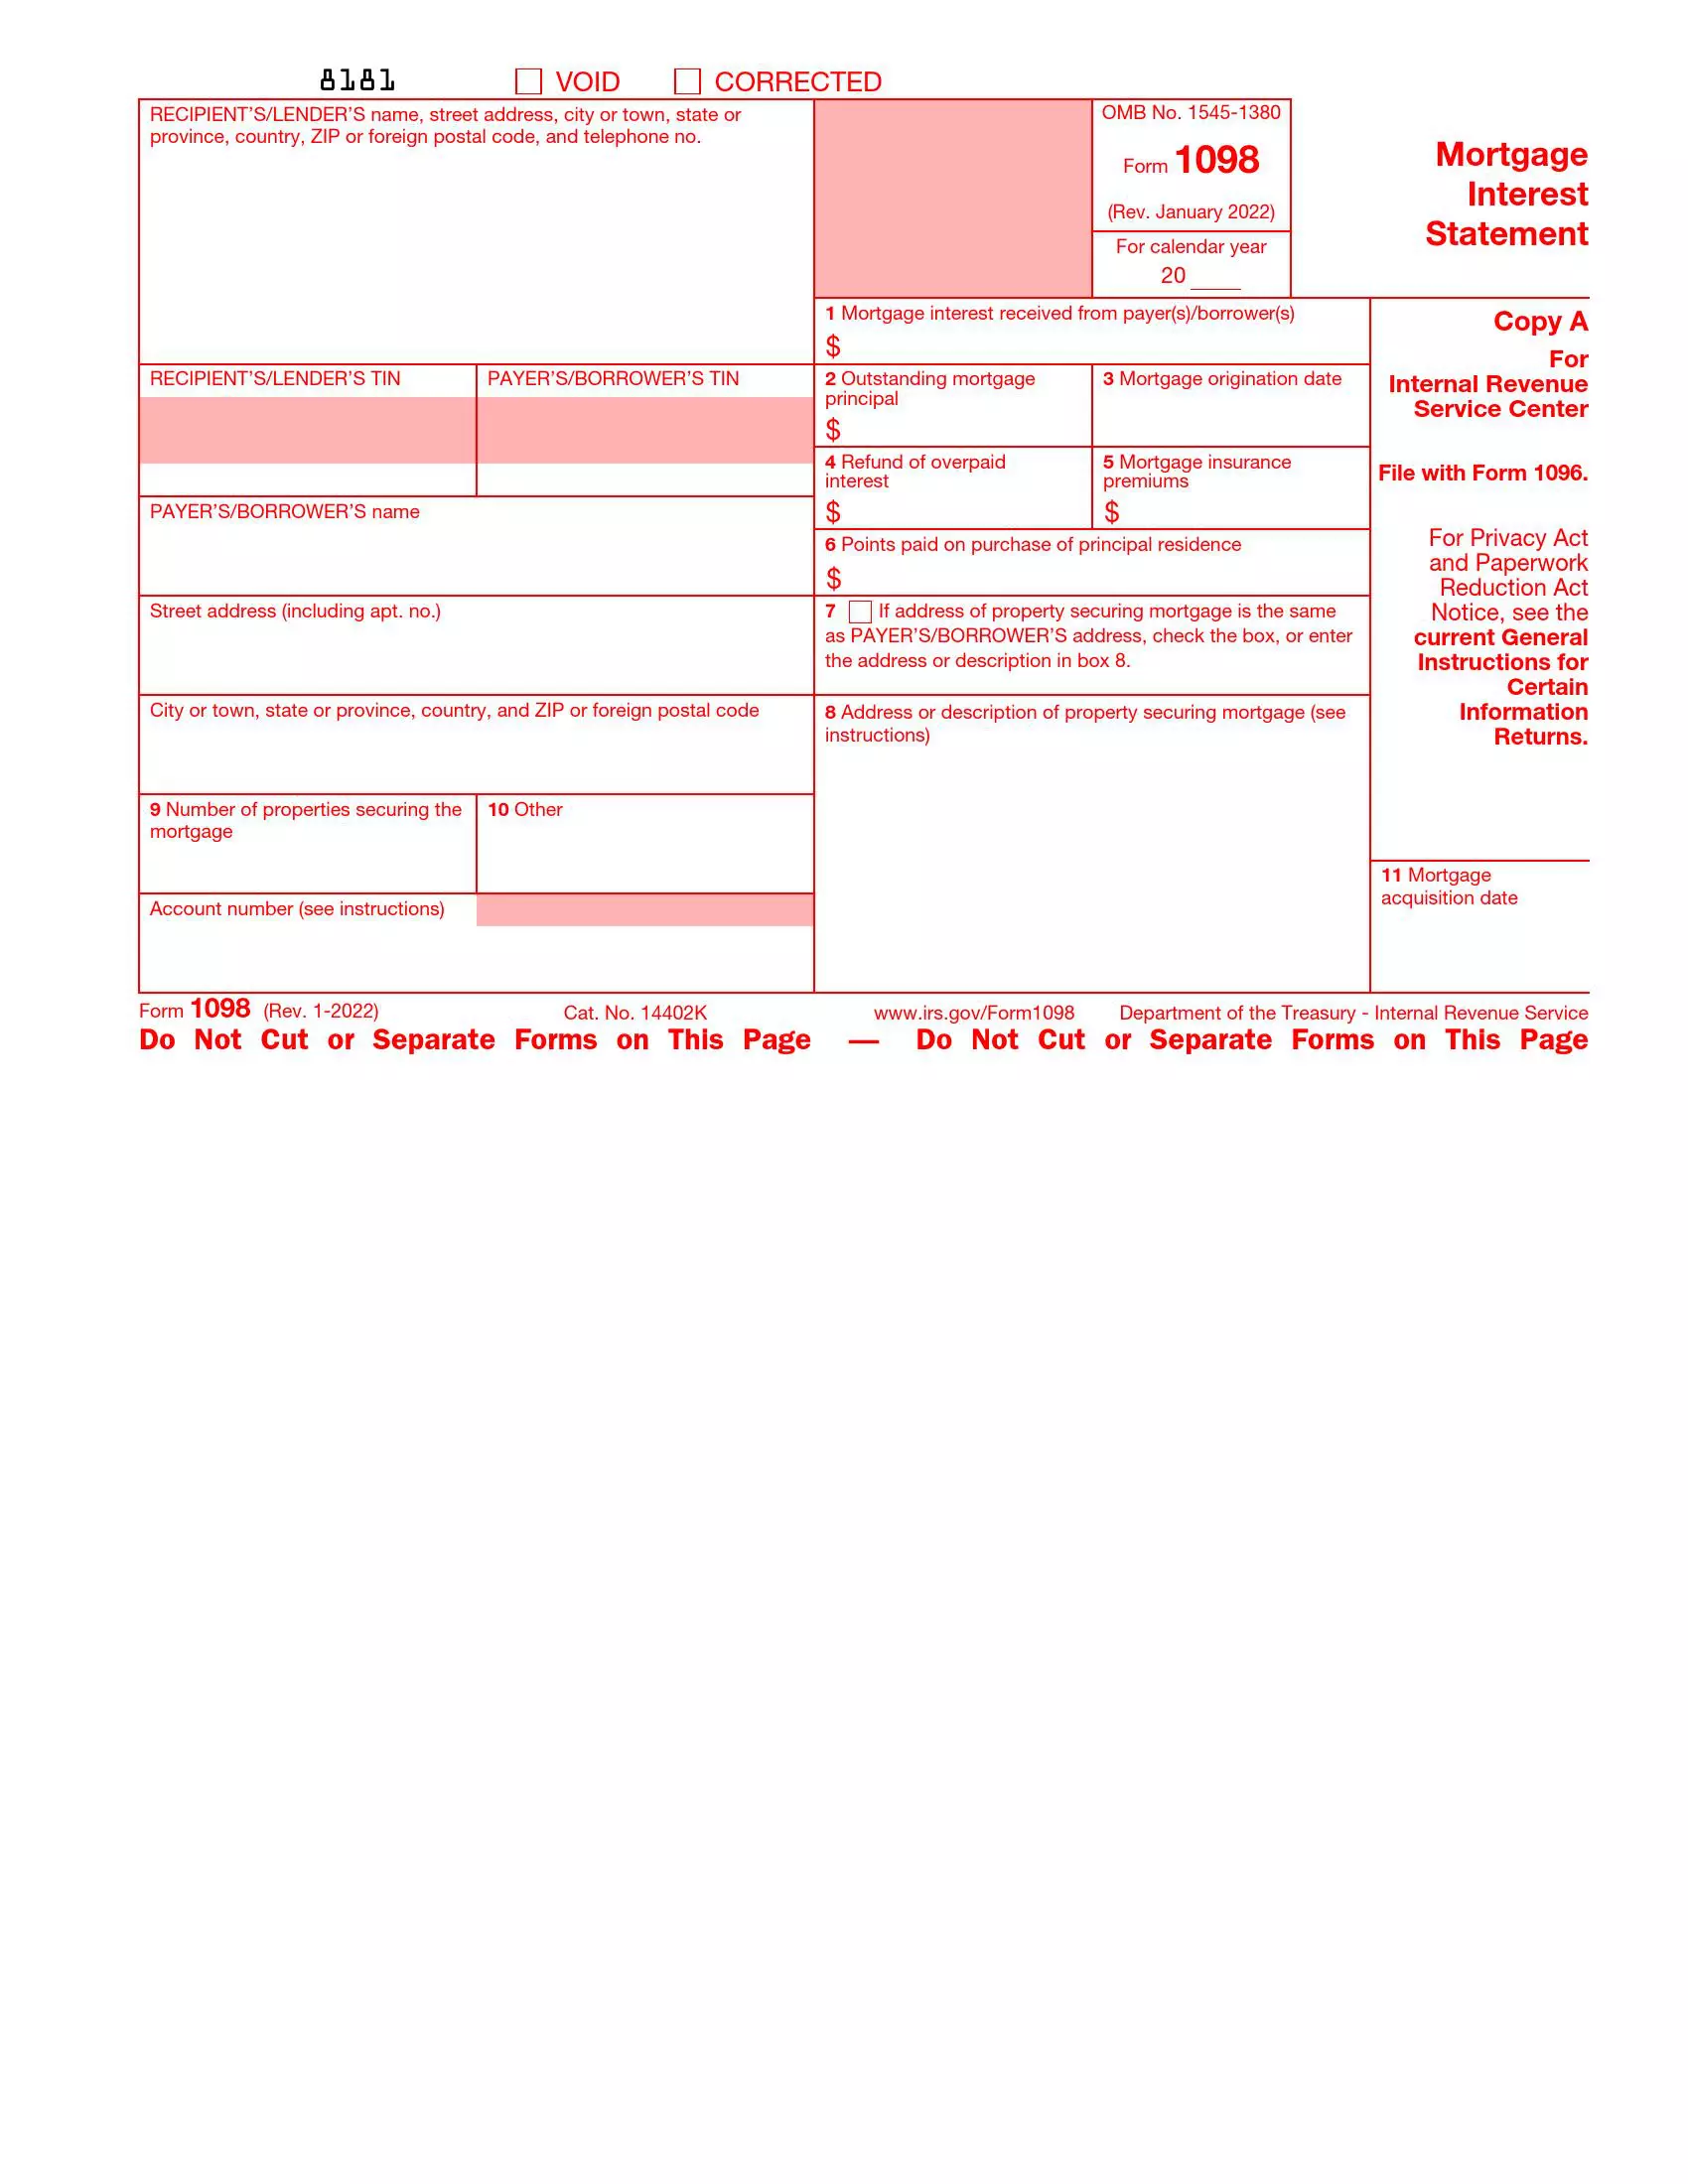 irs form 1098 rev 01 2022 preview